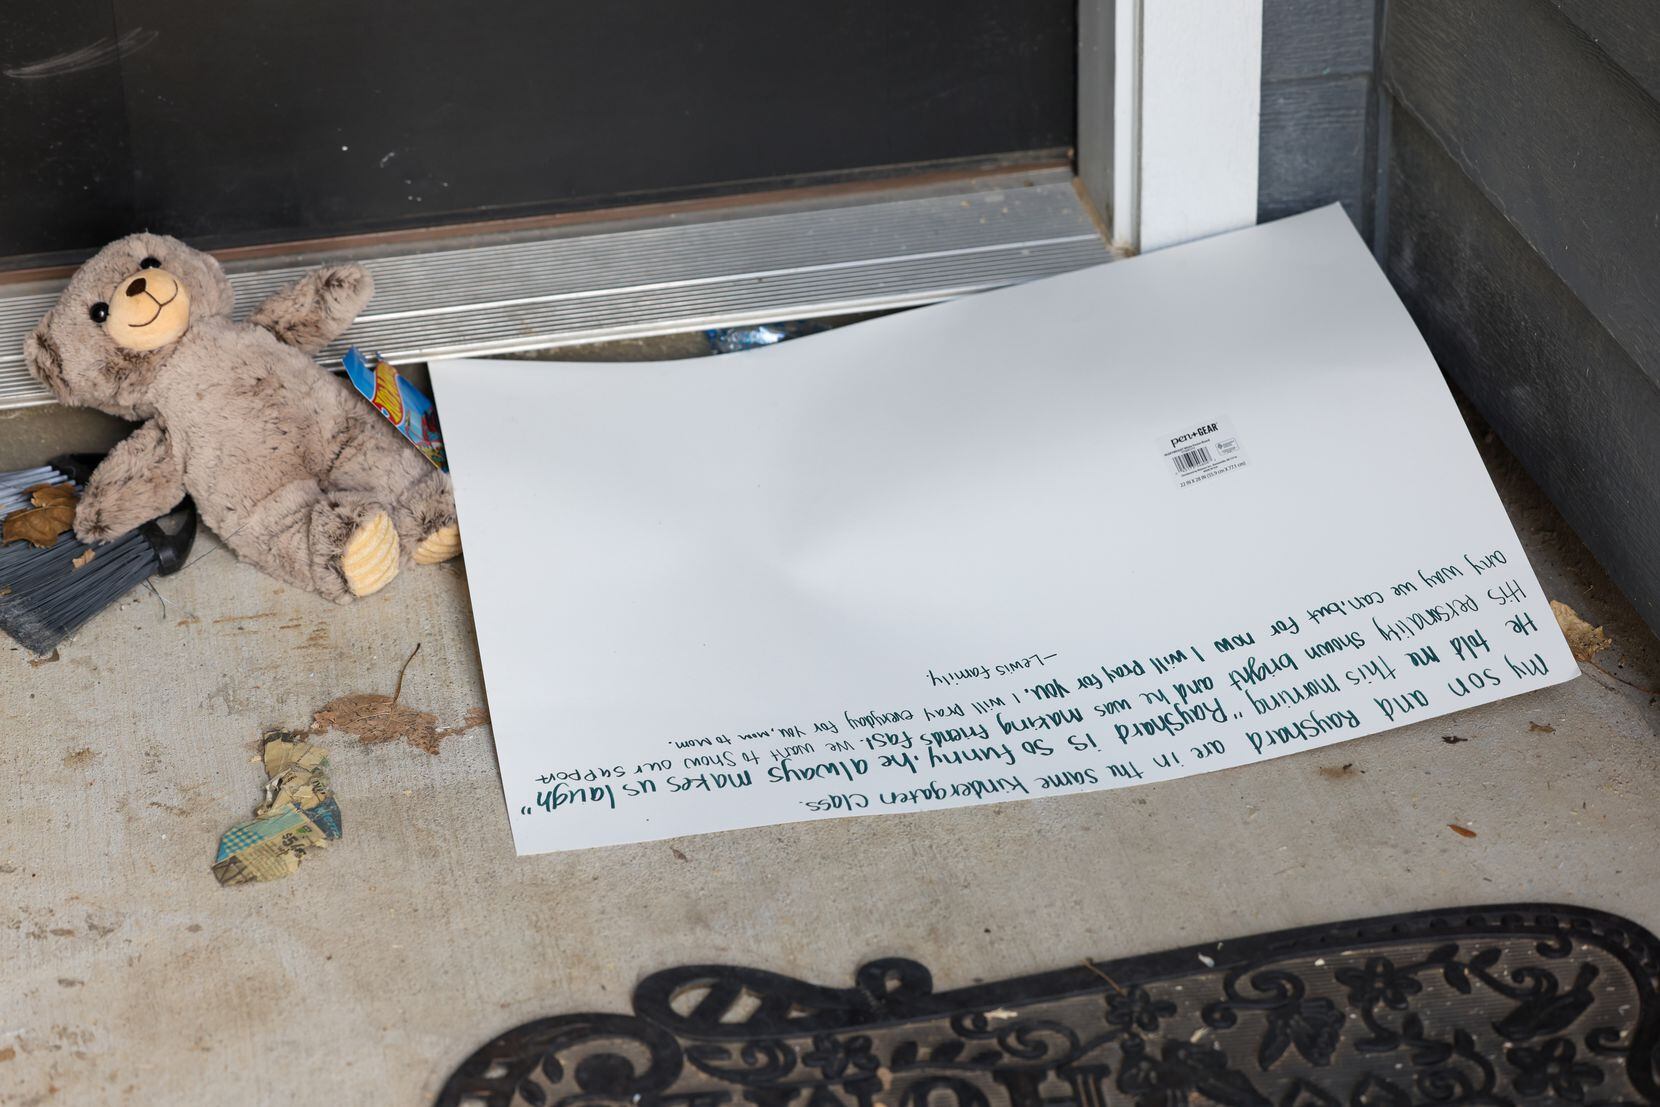 A poster was left on the doorstep of the home in Fort Worth on Monday, Aug. 29, 2022, where...